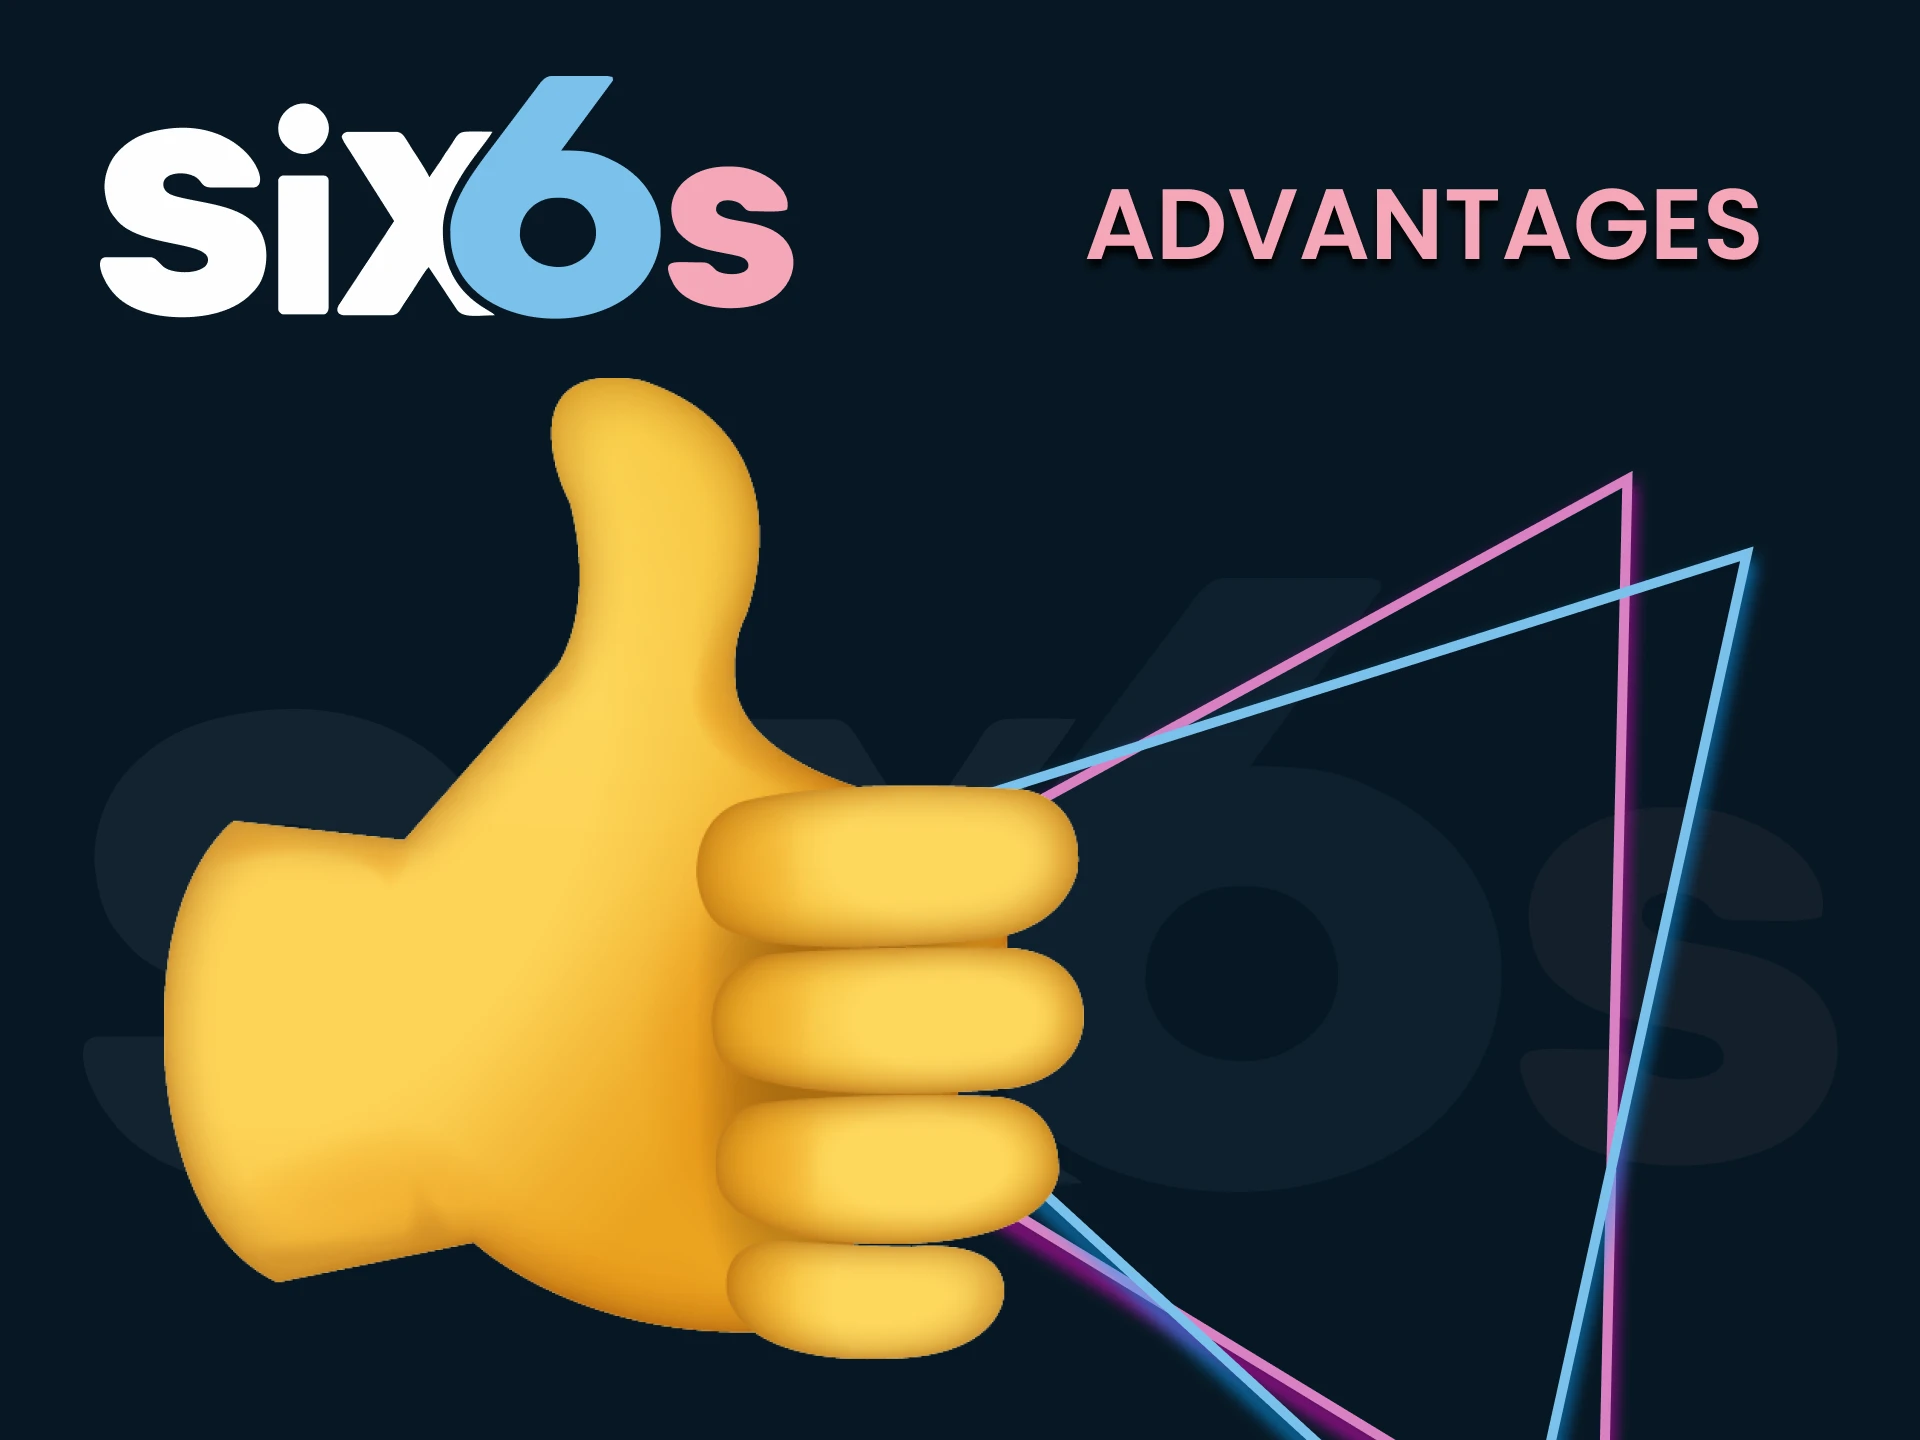 Find out the advantages of the exchange at six6s.